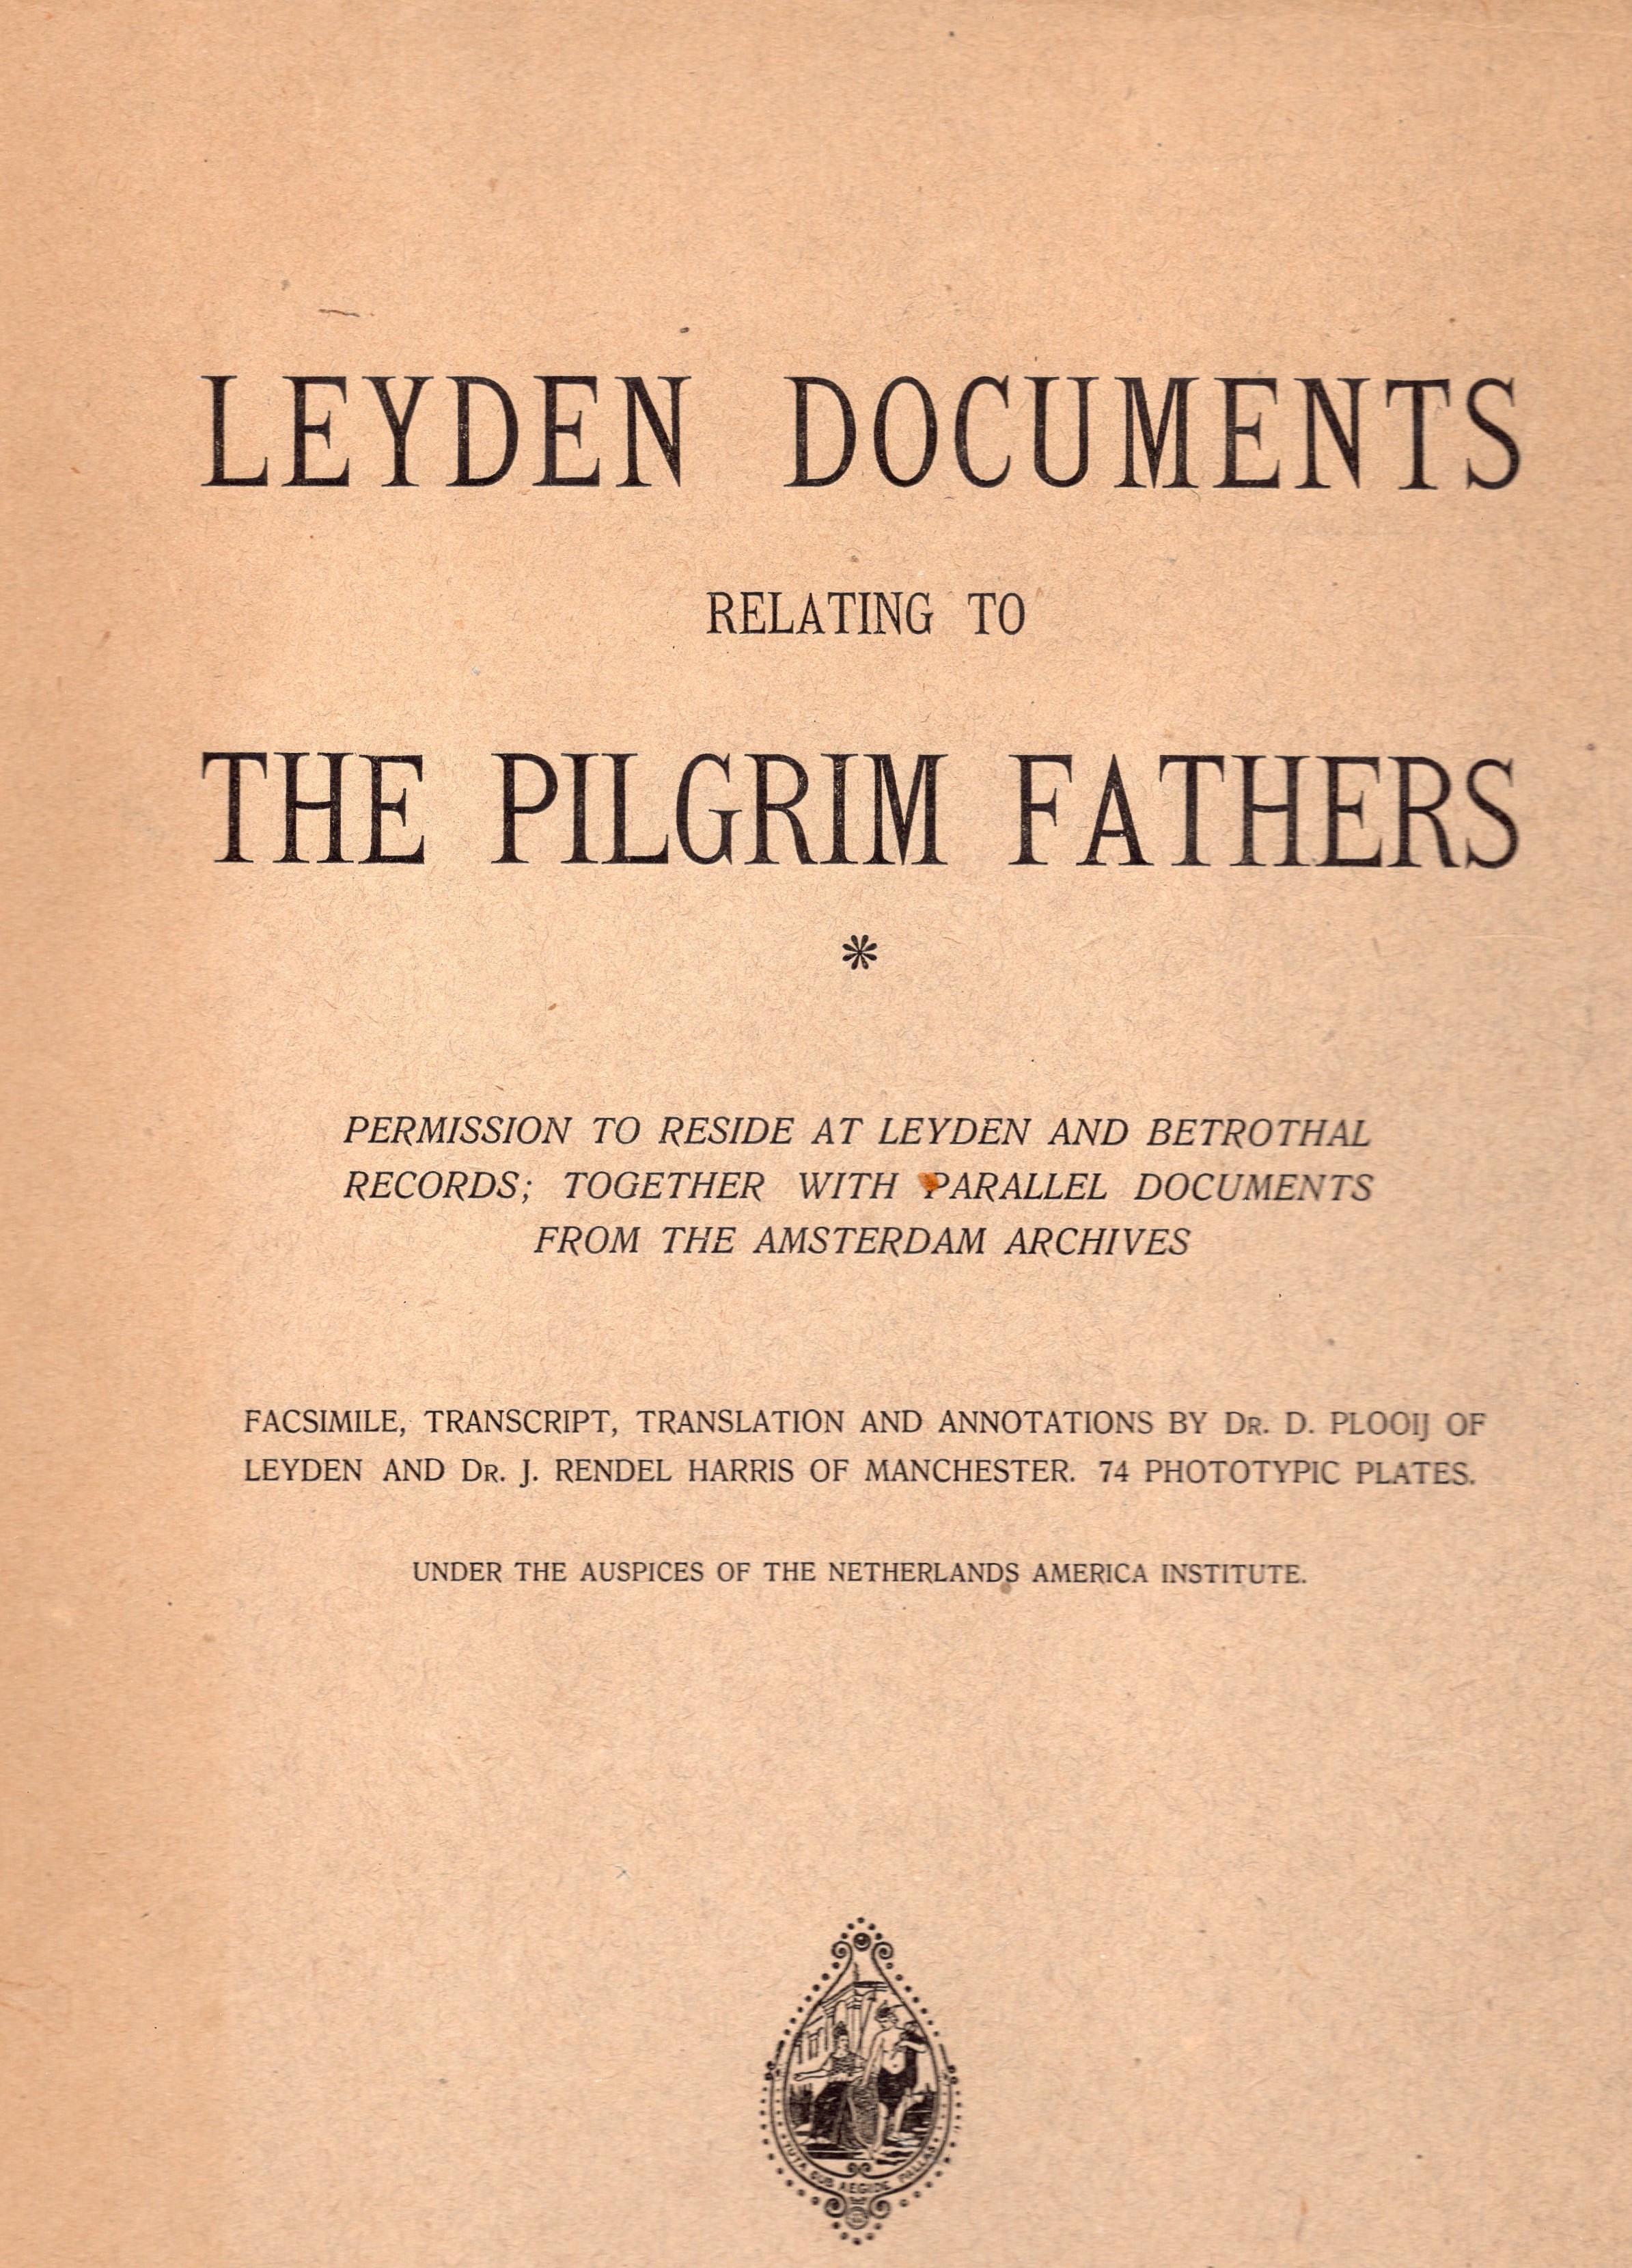 Plooij, D.; J. Rendel Harris - Leyden documents relating to the Pilgrim Fathers, permission to reside at Leyden and betrothal records: together with parallel documents from the Amsterdam archives.